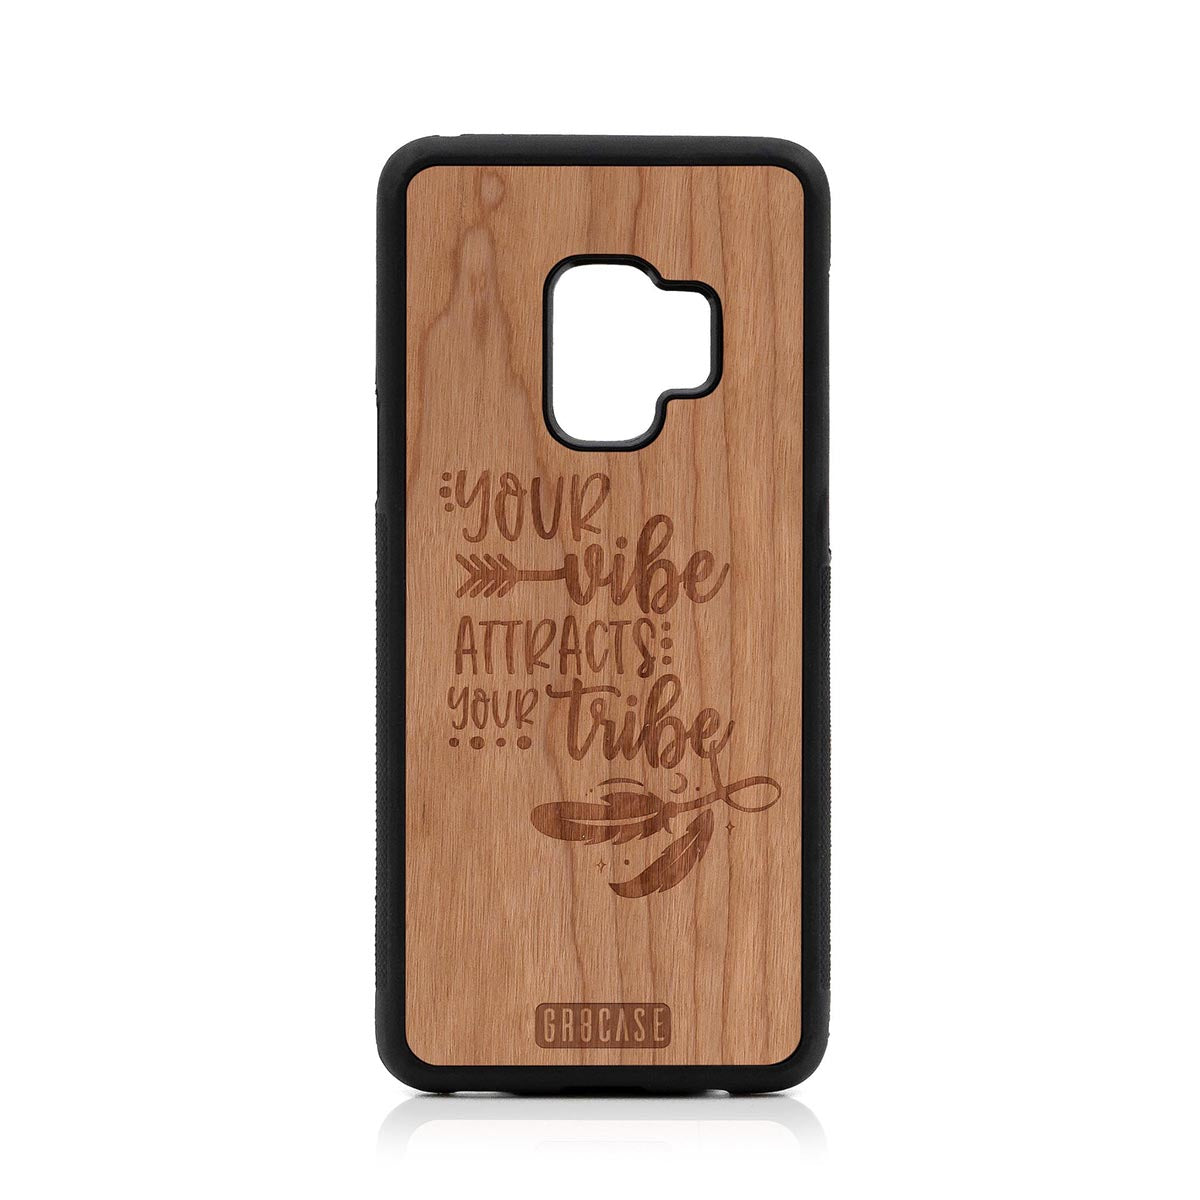 Your Vibe Attracts Your Tribe Design Wood Case Samsung Galaxy S9